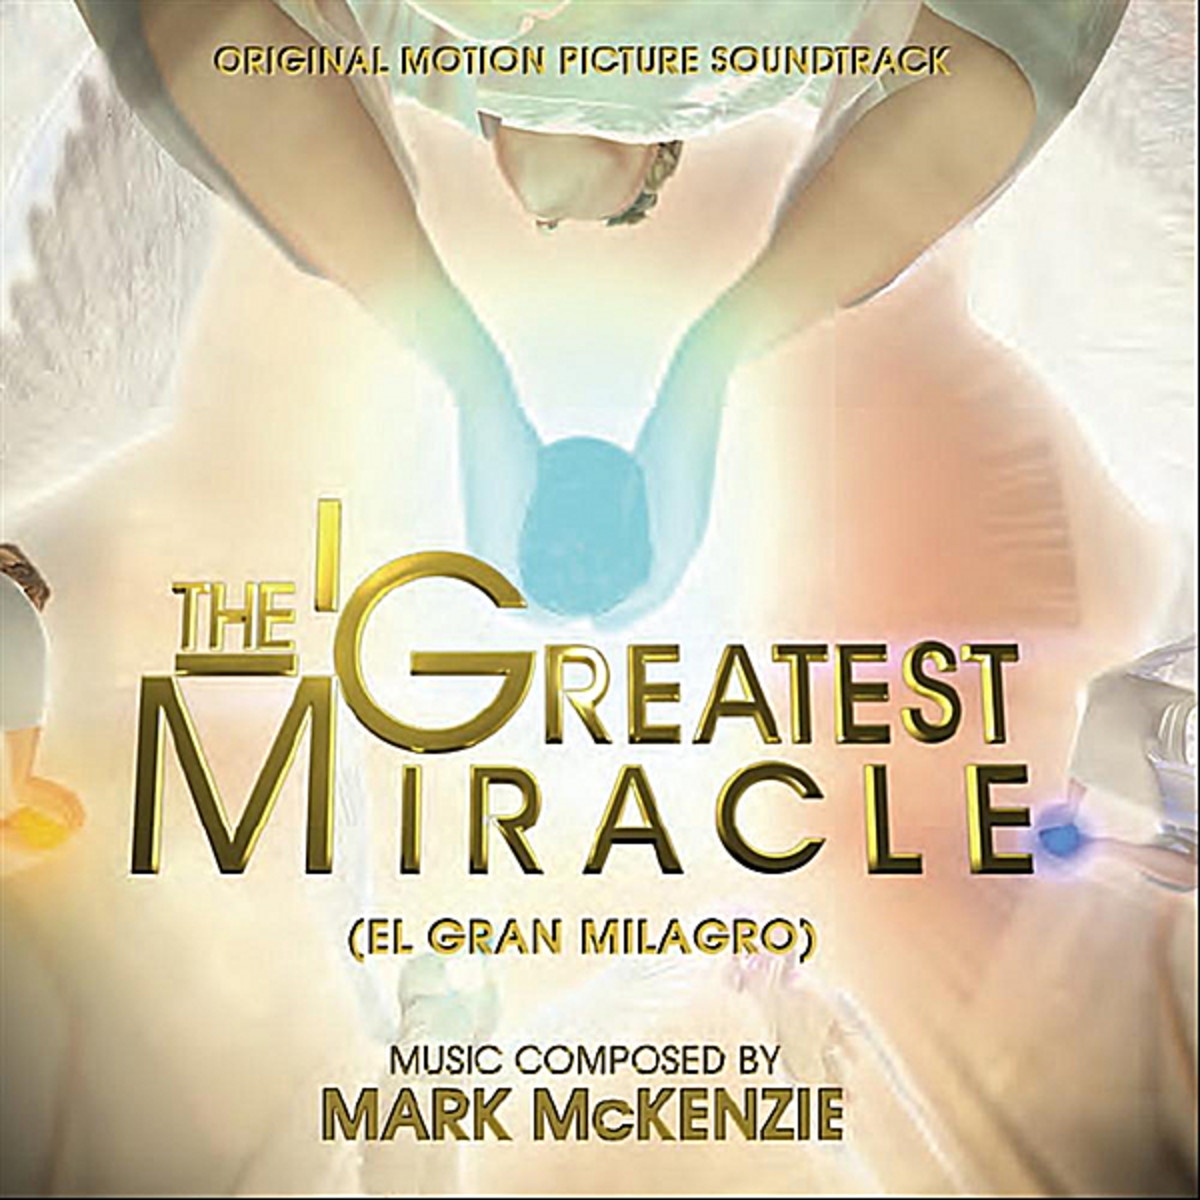 The Greatest Miracle (El Gran Milagro) [Original Motion Picture Soundtrack]